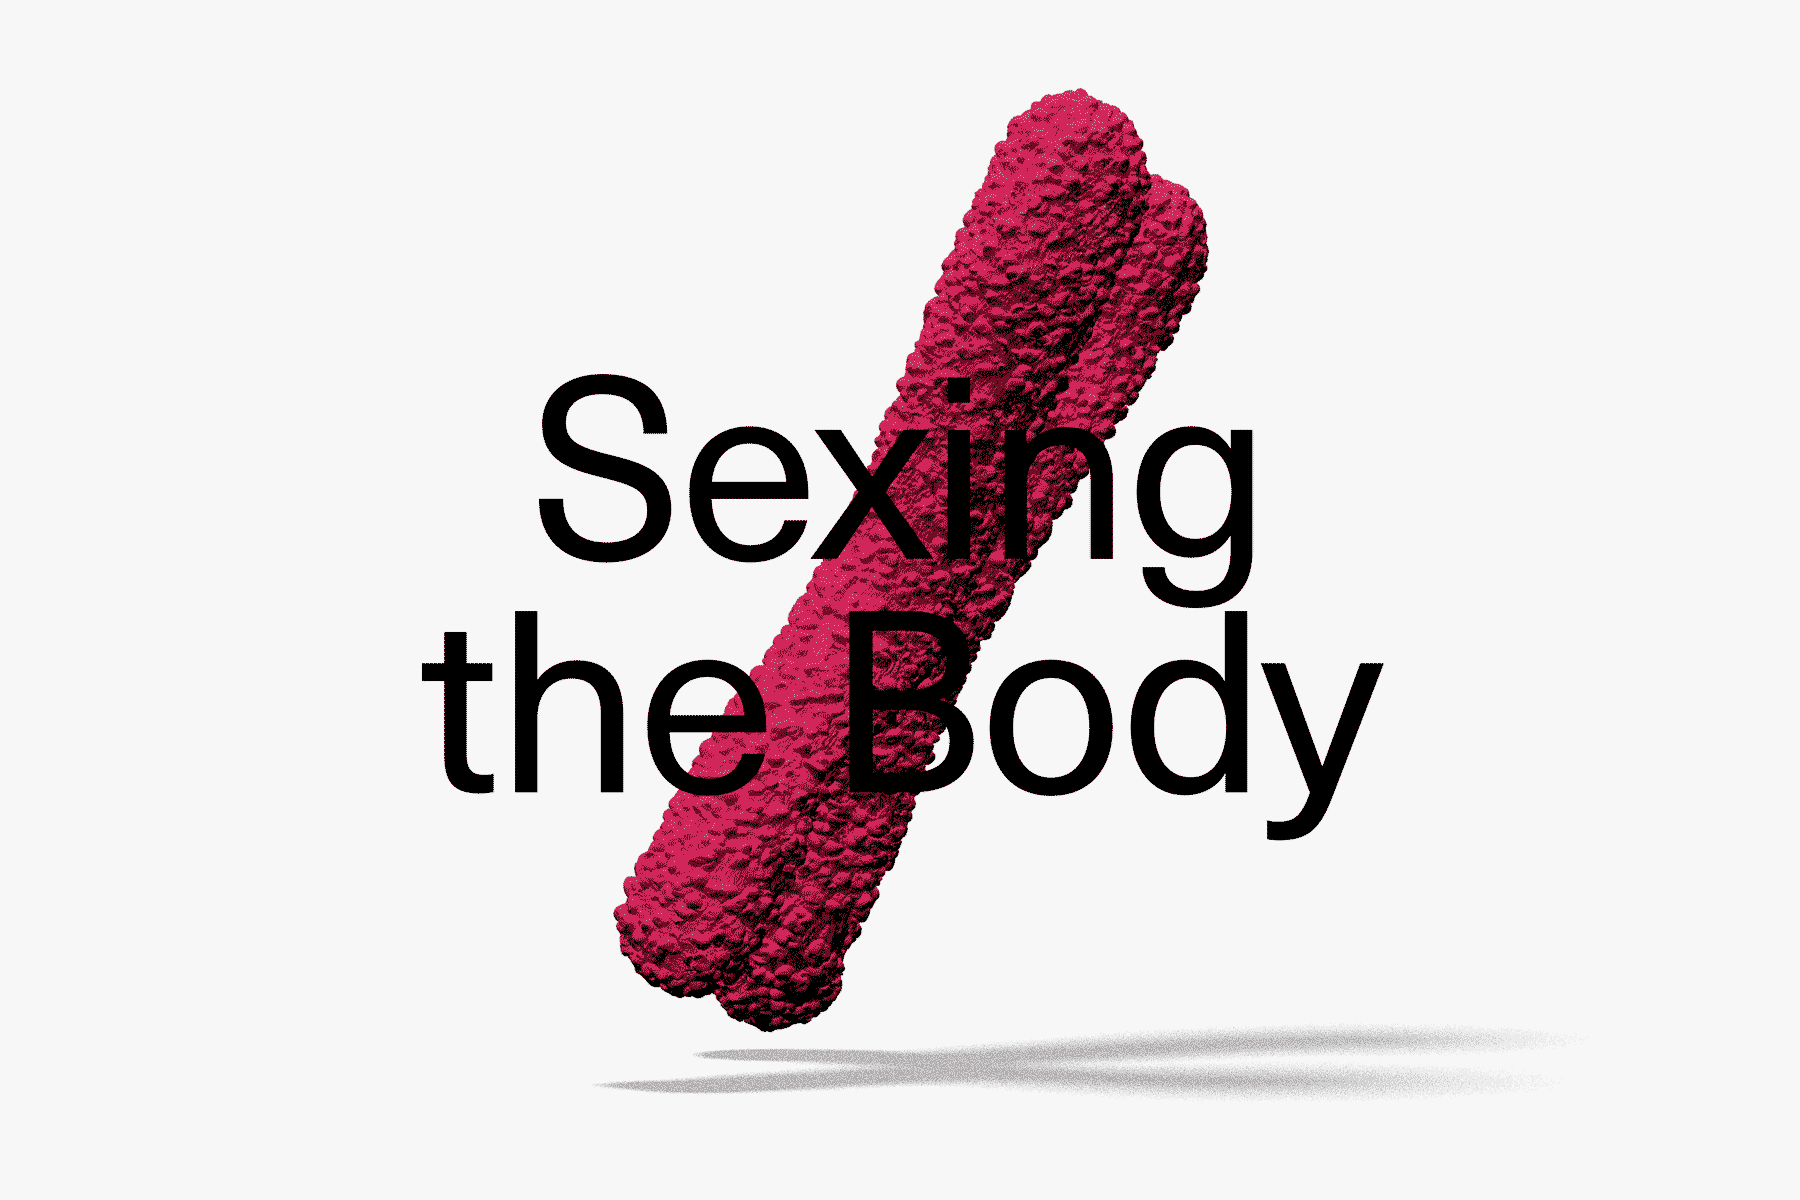 Science & Society 7: Sexing the Body